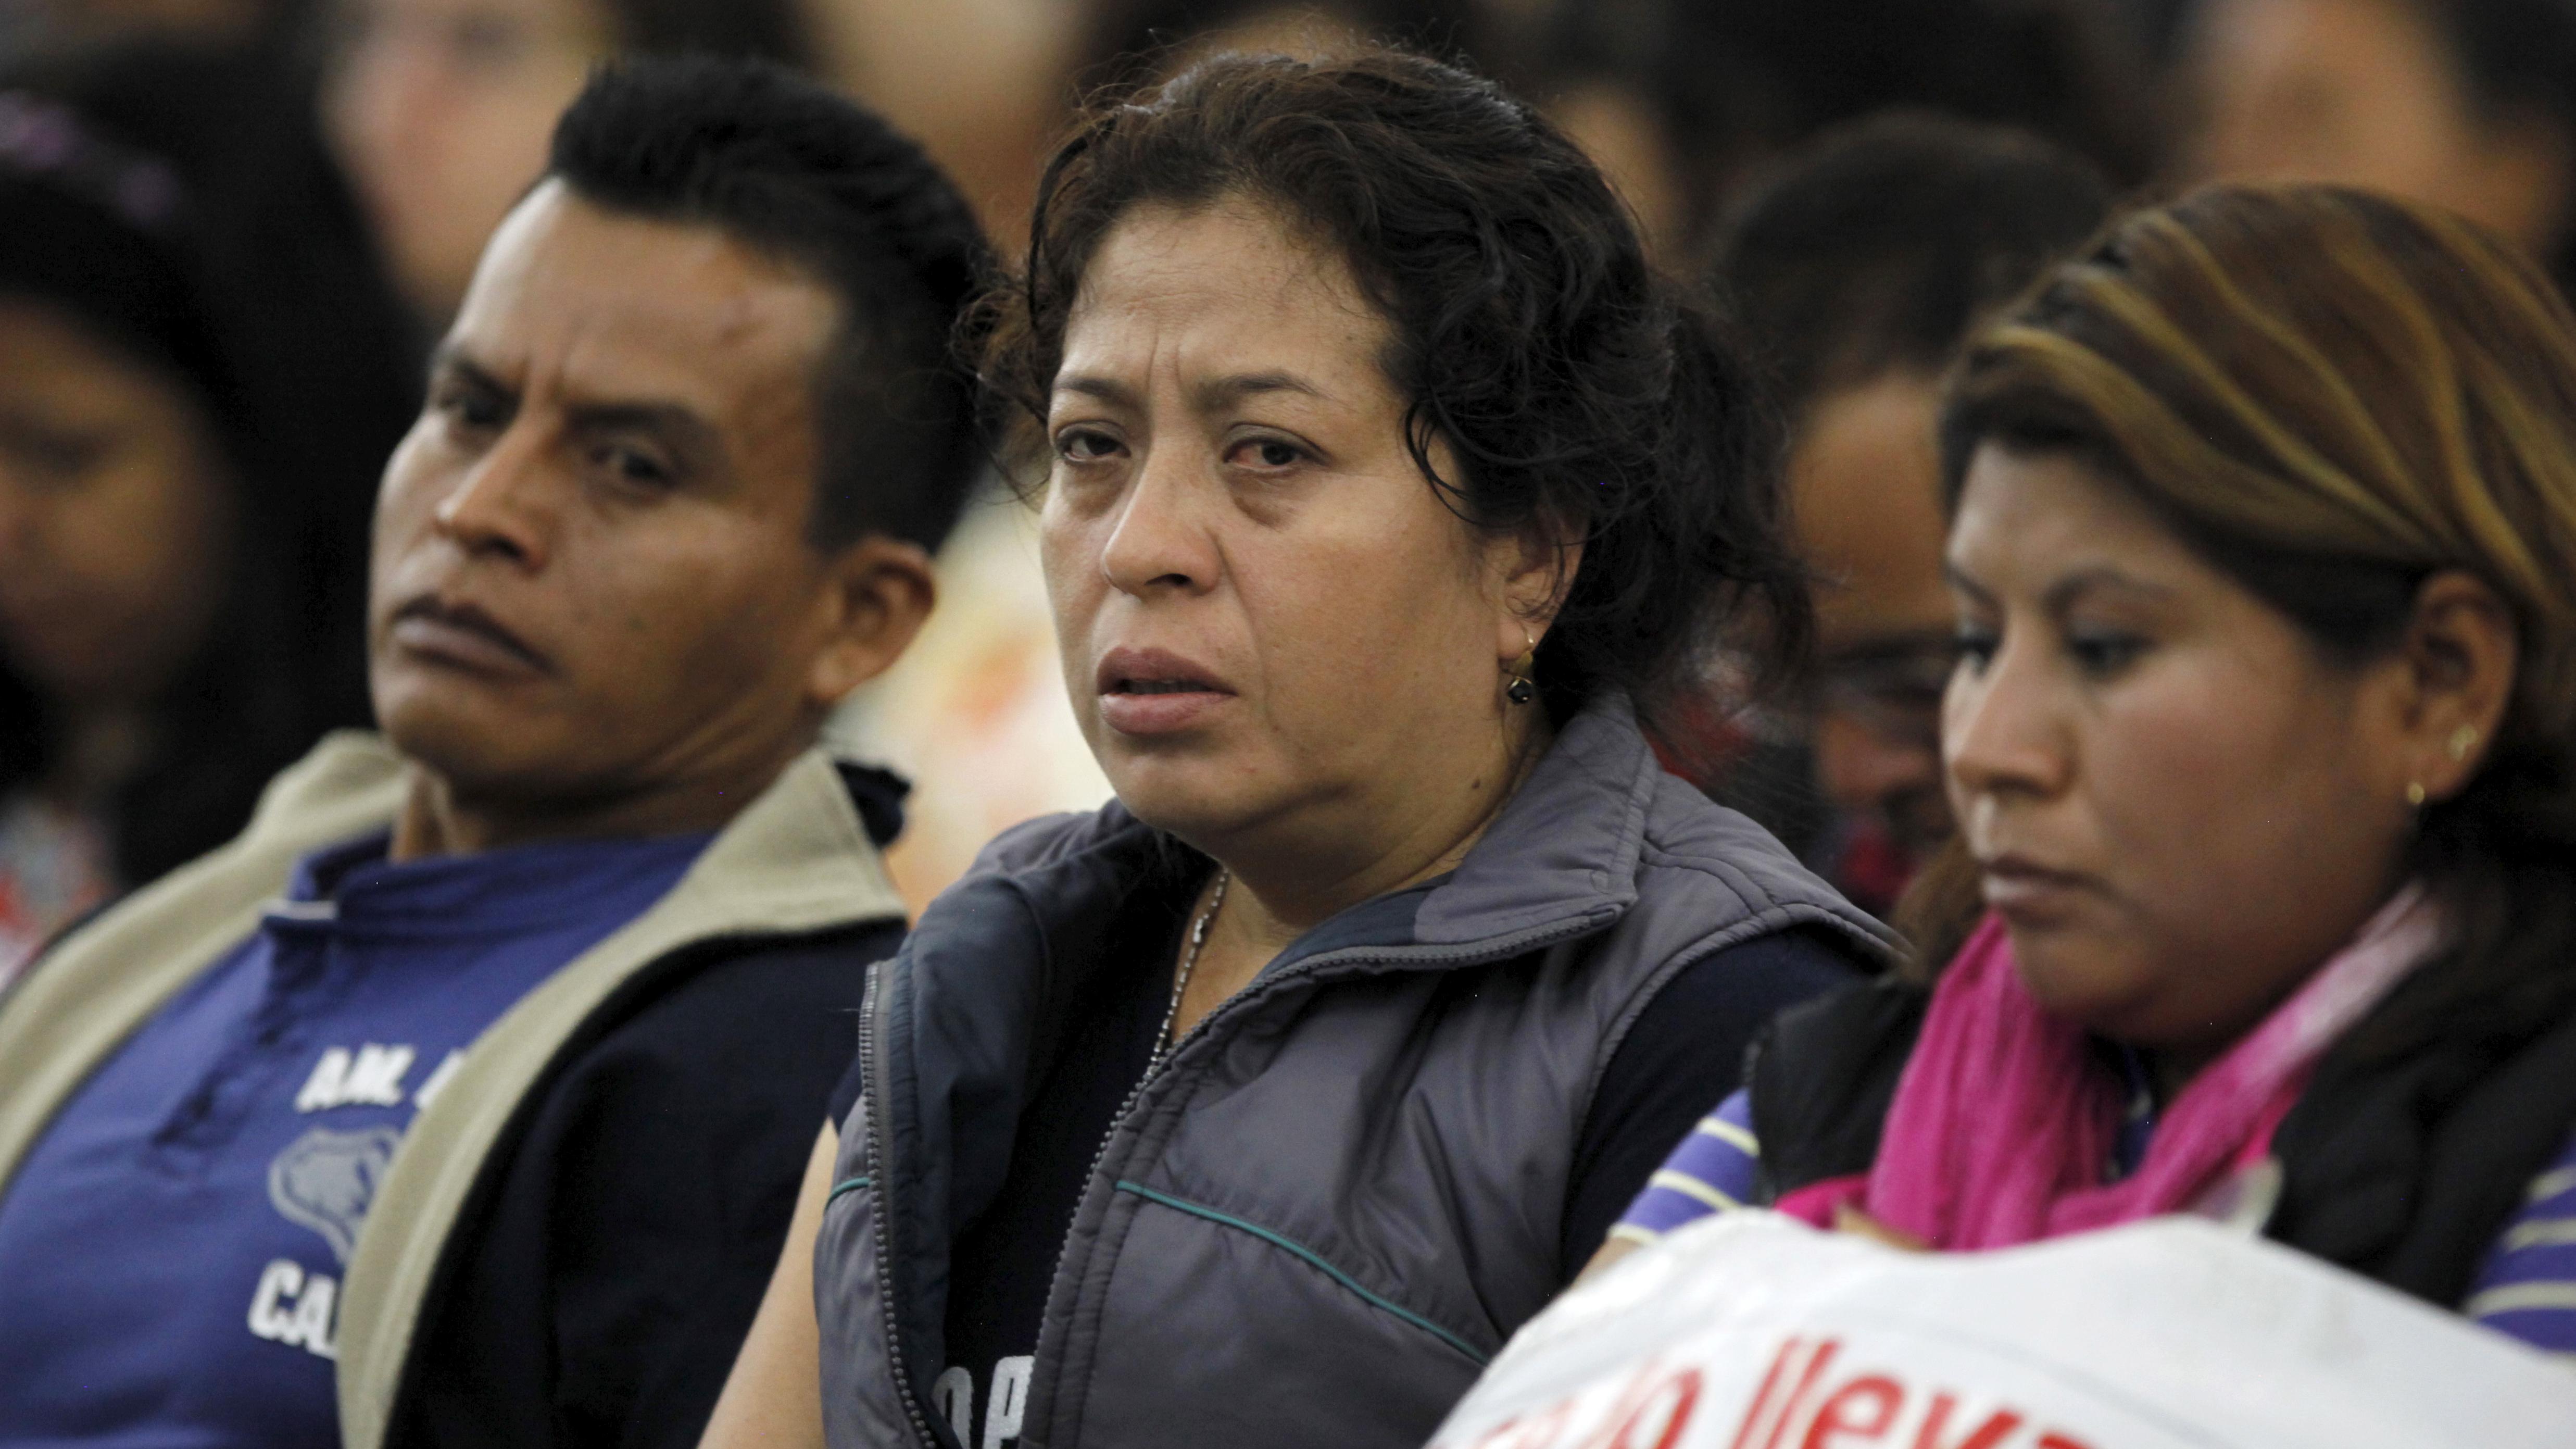 Family members of some of the 43 missing students from the Ayotzinapa teachers' training college attend a report given by members of a team of international experts in Mexico City September 6, 2015.